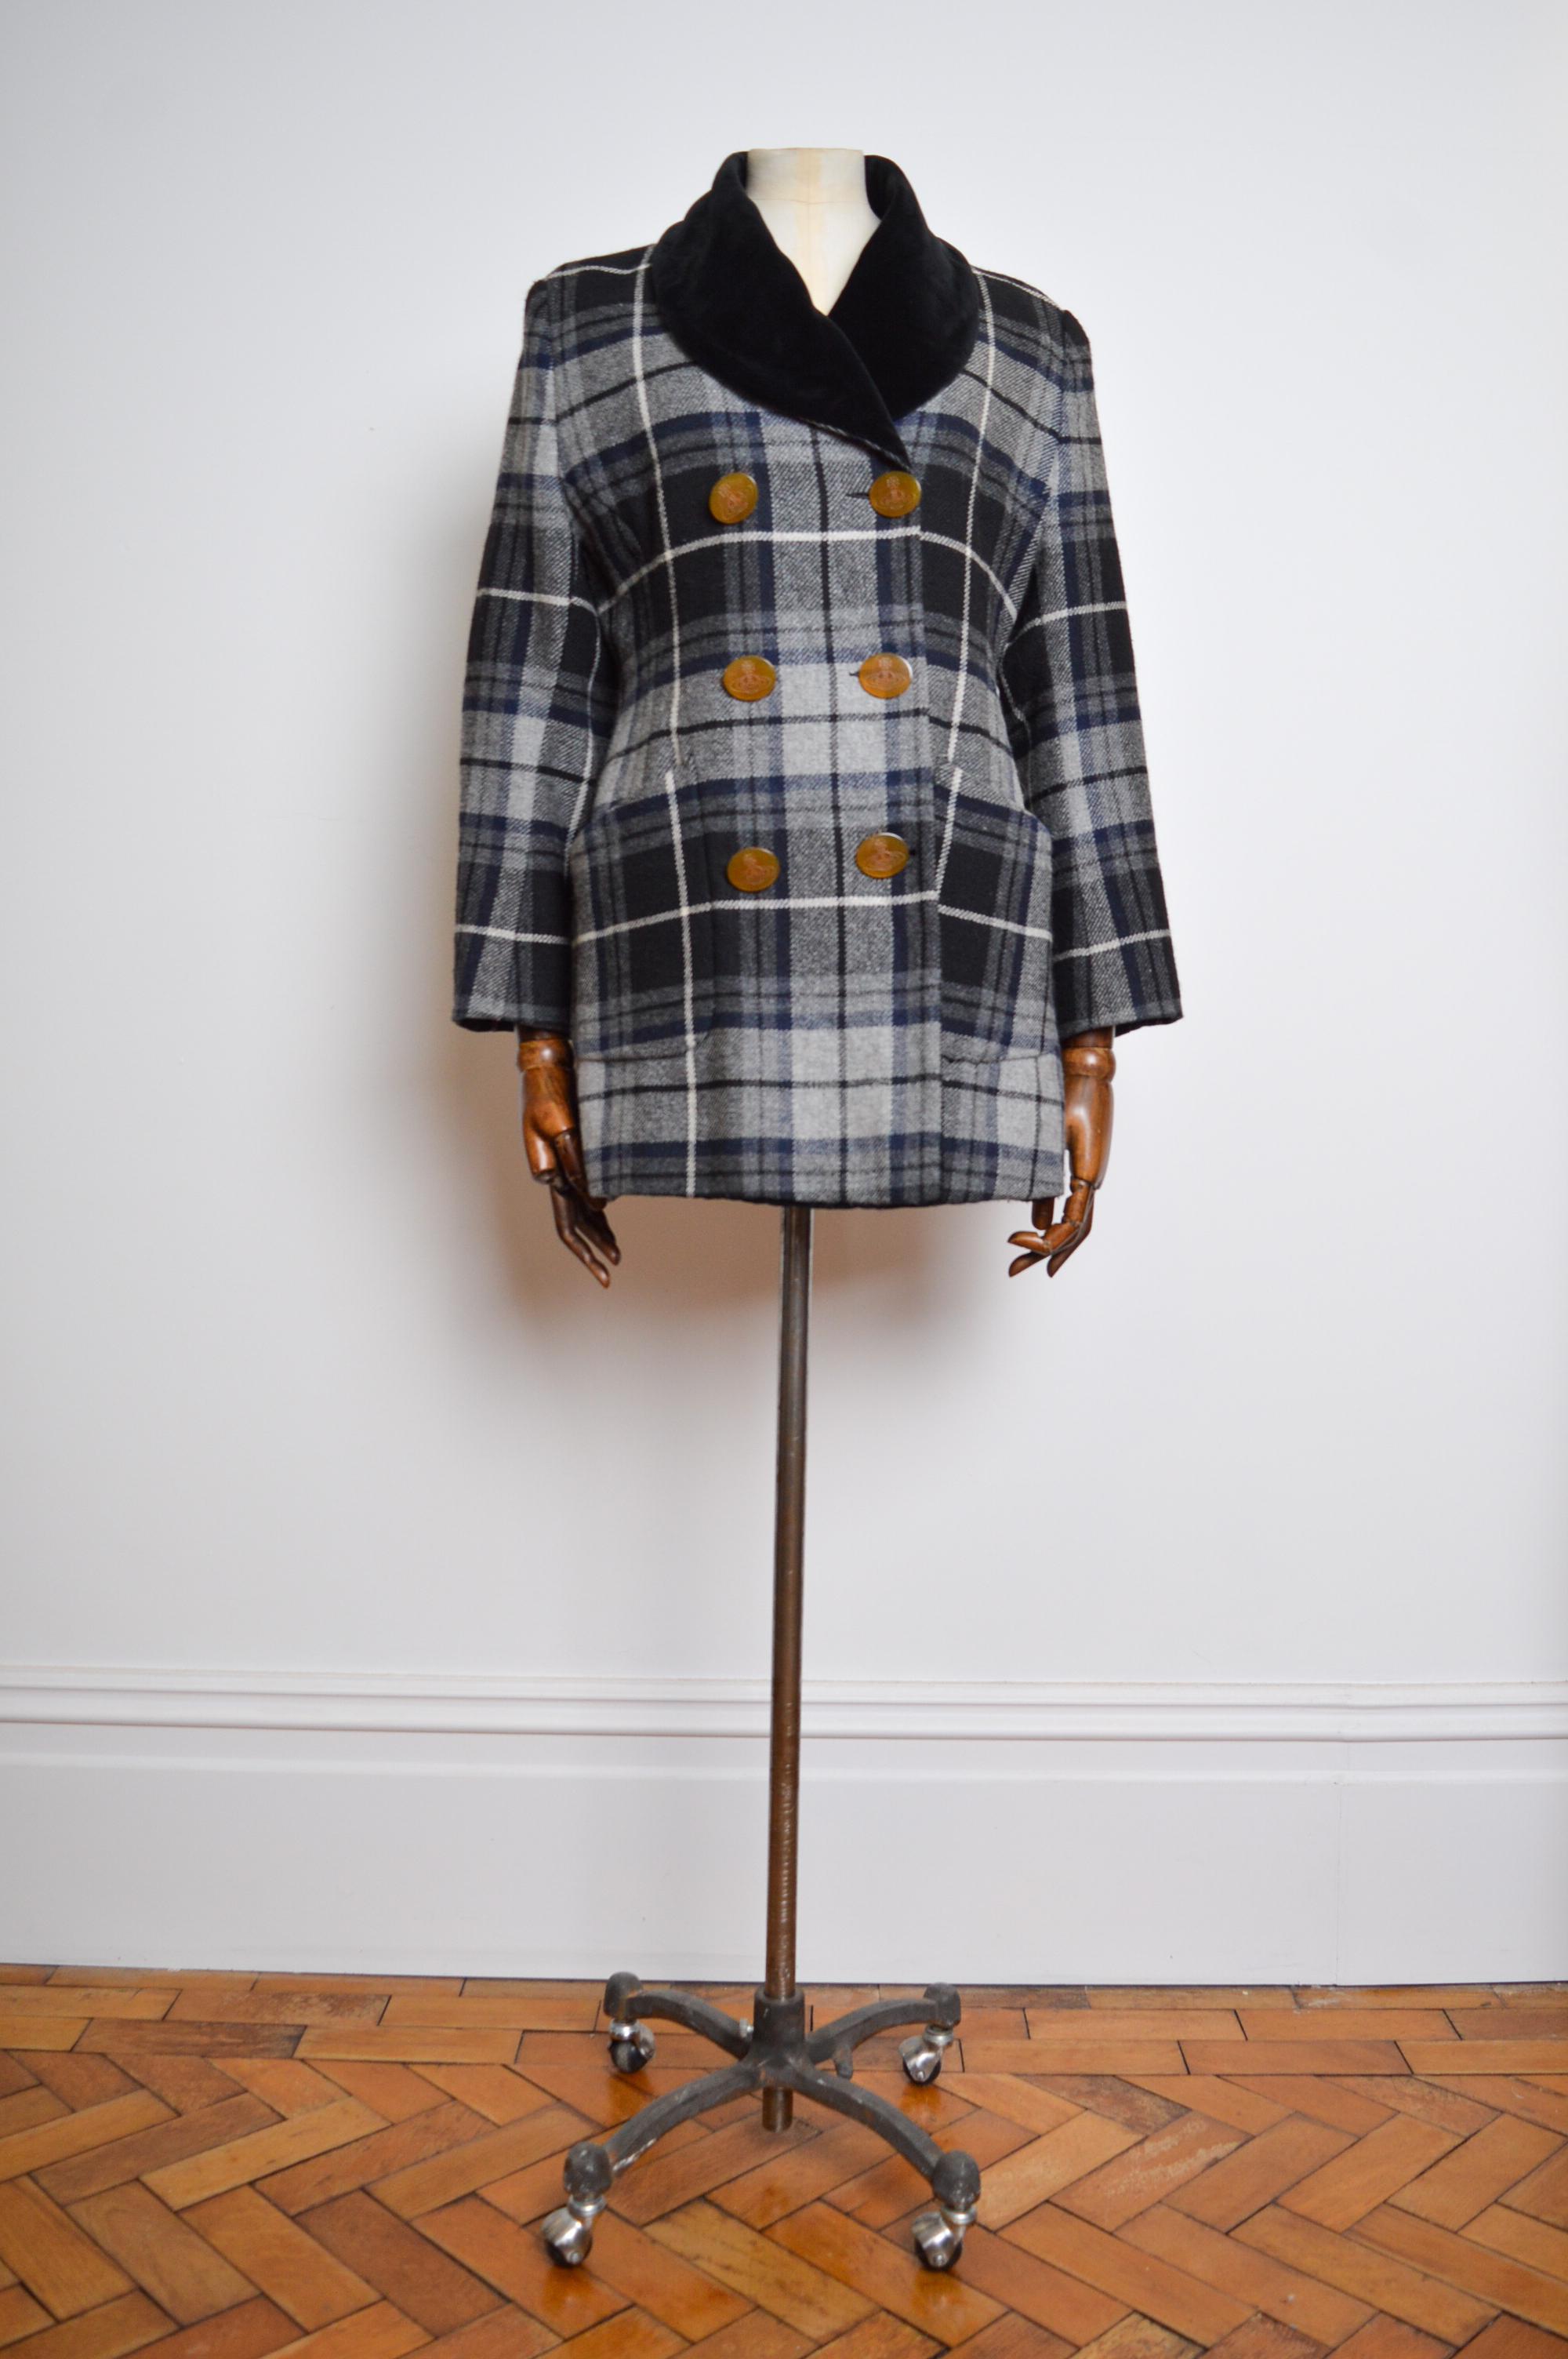 Superb, extremely Rare AW 1995/1996 Vintage  Double Breasted Tartan Coat by Vivienne Westwood for French Catalogue '3 Suisses'.

A Museum worthy exemplary of fashion 'Collaboration'.

Features;
Signature Amber Orb Buttons
Plush Velvet collar